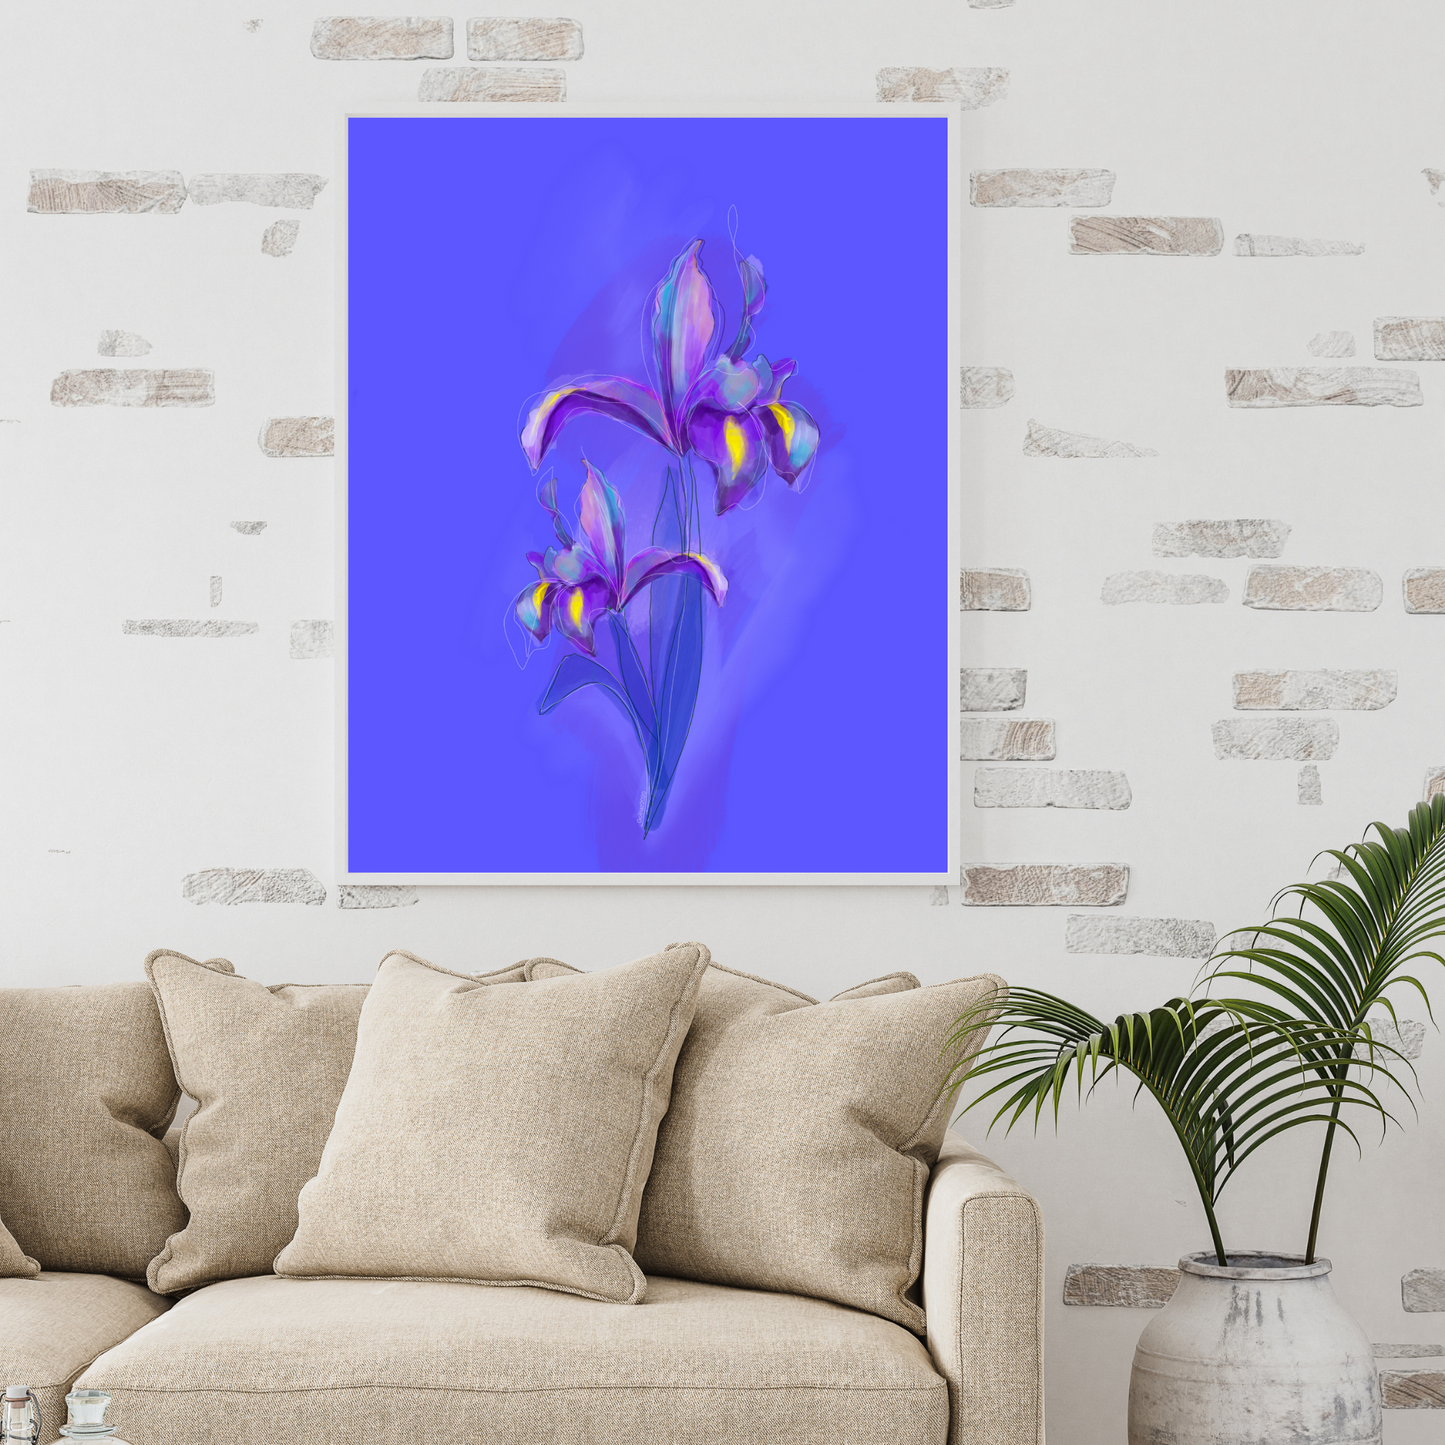 An example of the Iris painting by ArisaTeam in a living room